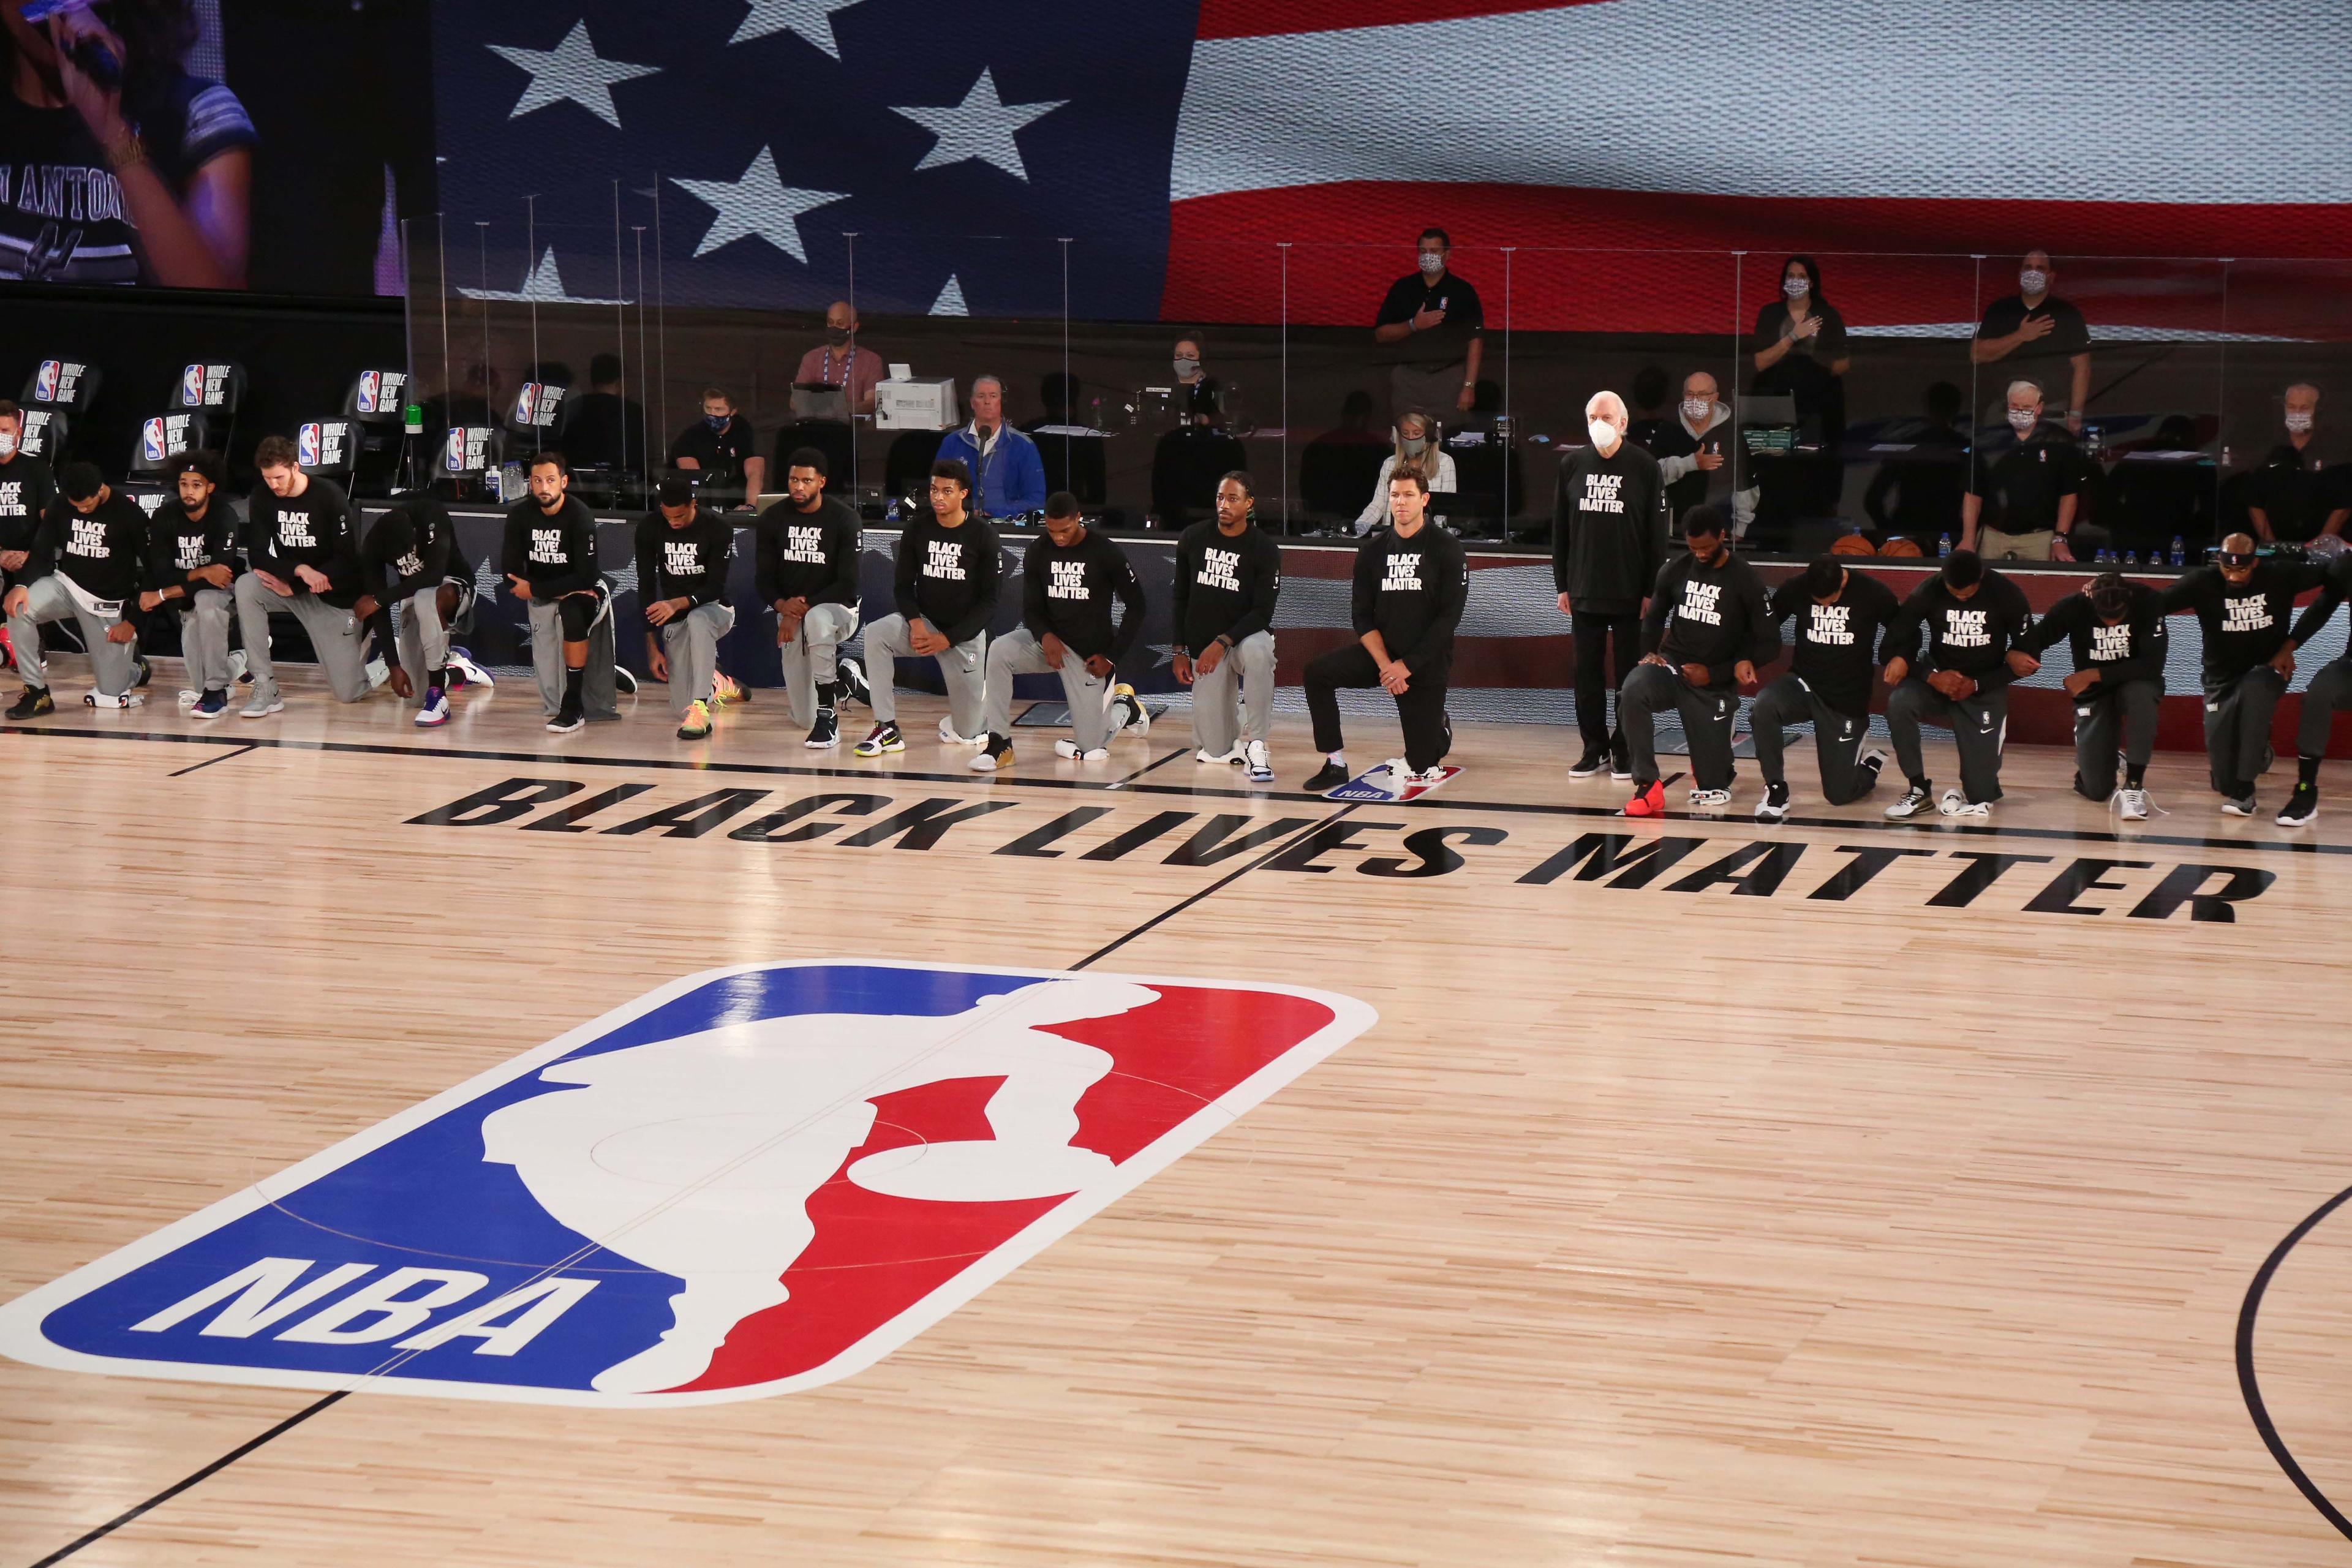 Jul 31, 2020; Lake Buena Vista, Florida, USA; San Antonio Spurs head coach Gregg Popovich stands as other players and staff on the Spurs and the Sacramento Kings kneel around a Black Lives Matters logo on the court before a NBA basketball game at the Visa Athletic Center in the ESPN Wide World of Sports Complex. / Kim Klement-USA TODAY Sports